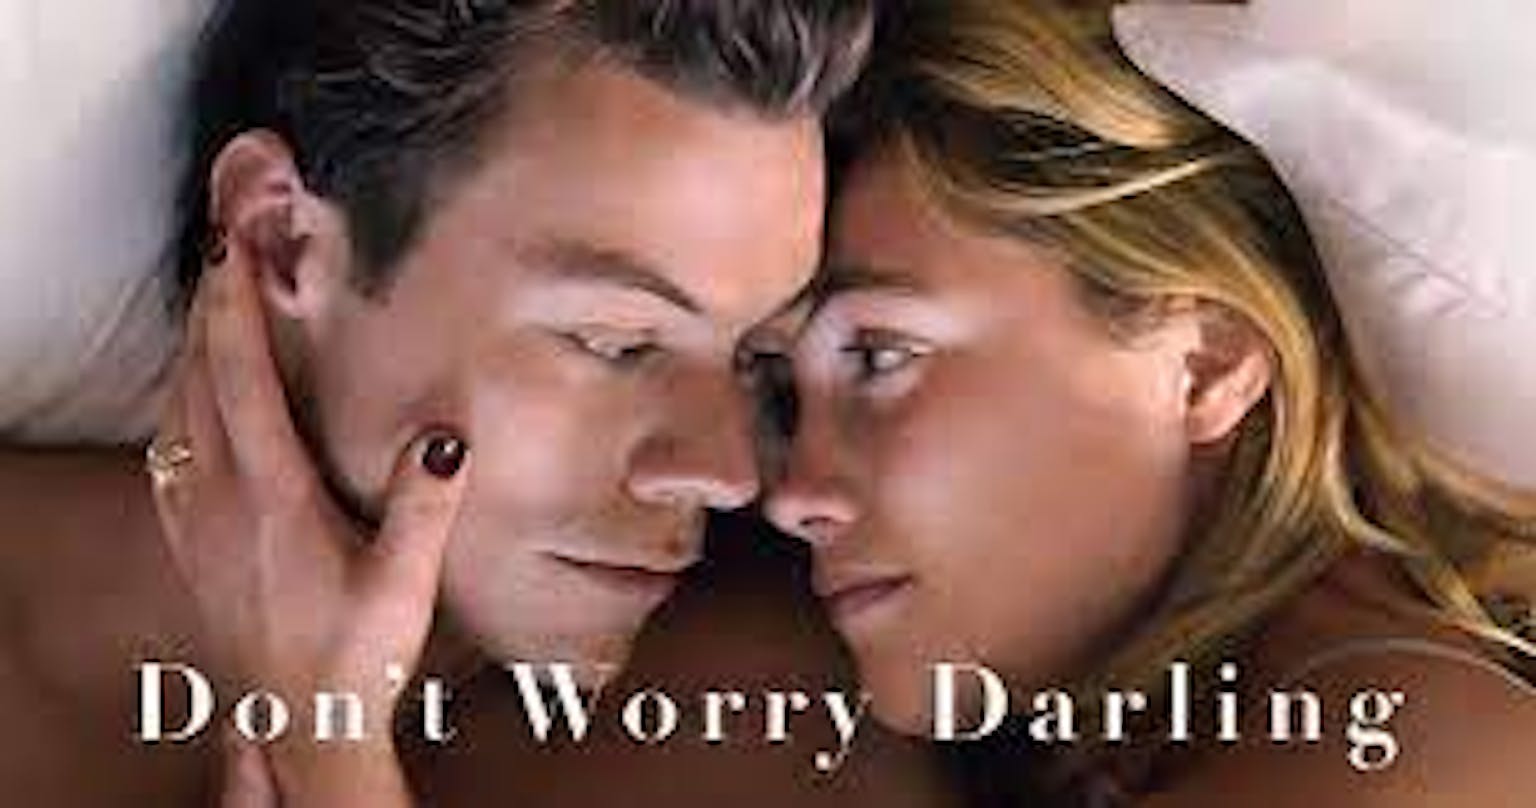 WaTch Don't Worry Darling hd(Free*) 2022 Online on 123movies